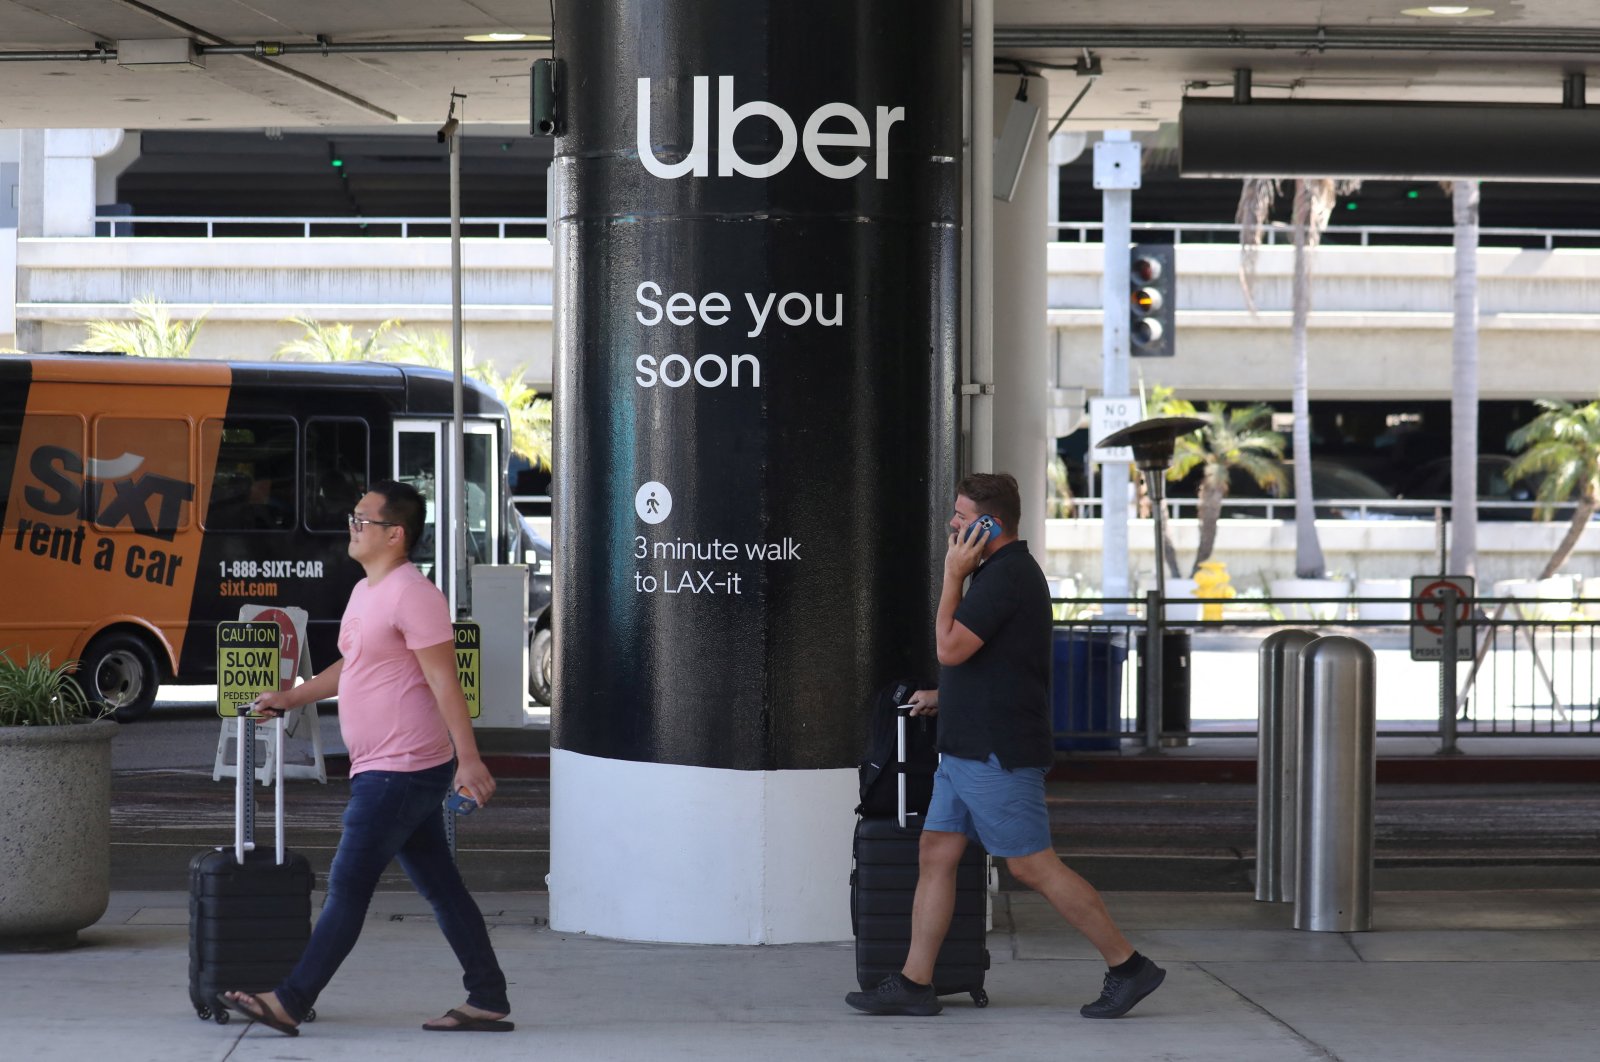 Passengers walk near Uber ride-share signage after arriving at Los Angeles International Airport (LAX) in Los Angeles, California, U.S., July 10, 2022. (Reuters Photo)